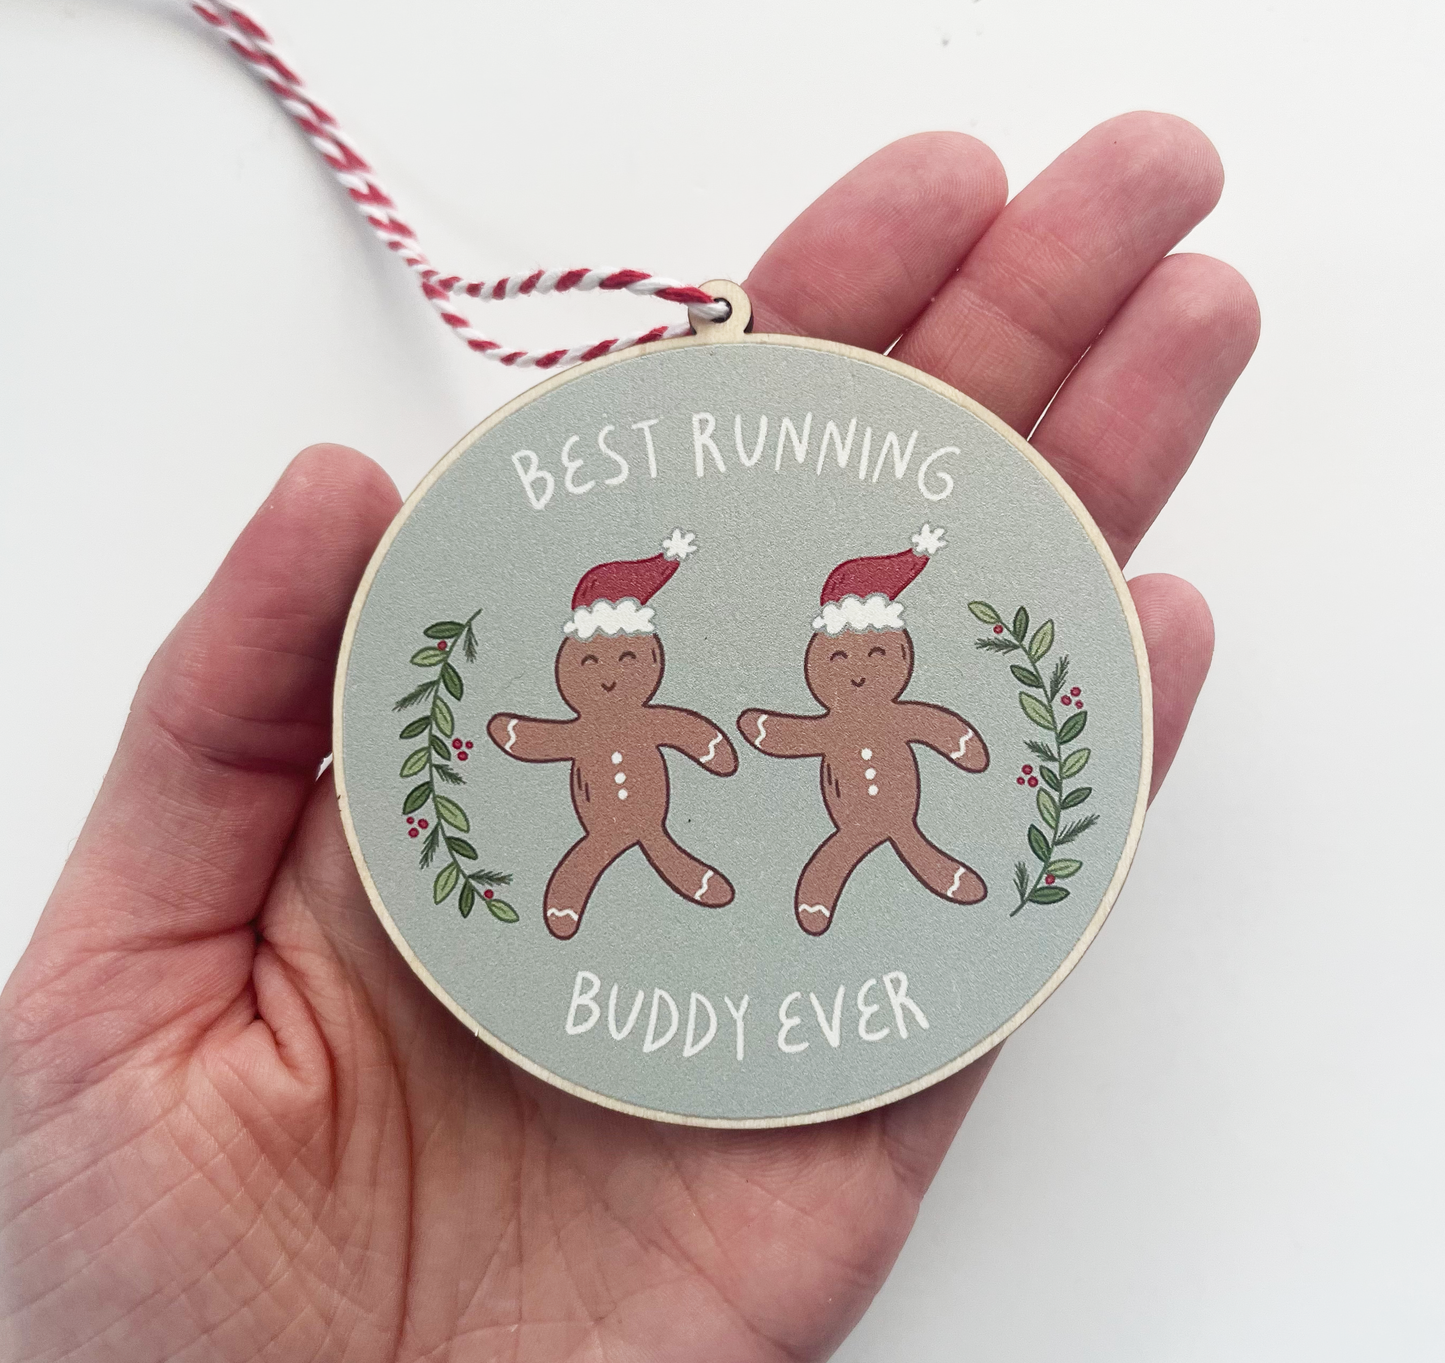 Circular ornament with two running gingerbread people with santa hats, surrounded with greenery on either side and the text best running buddy ever